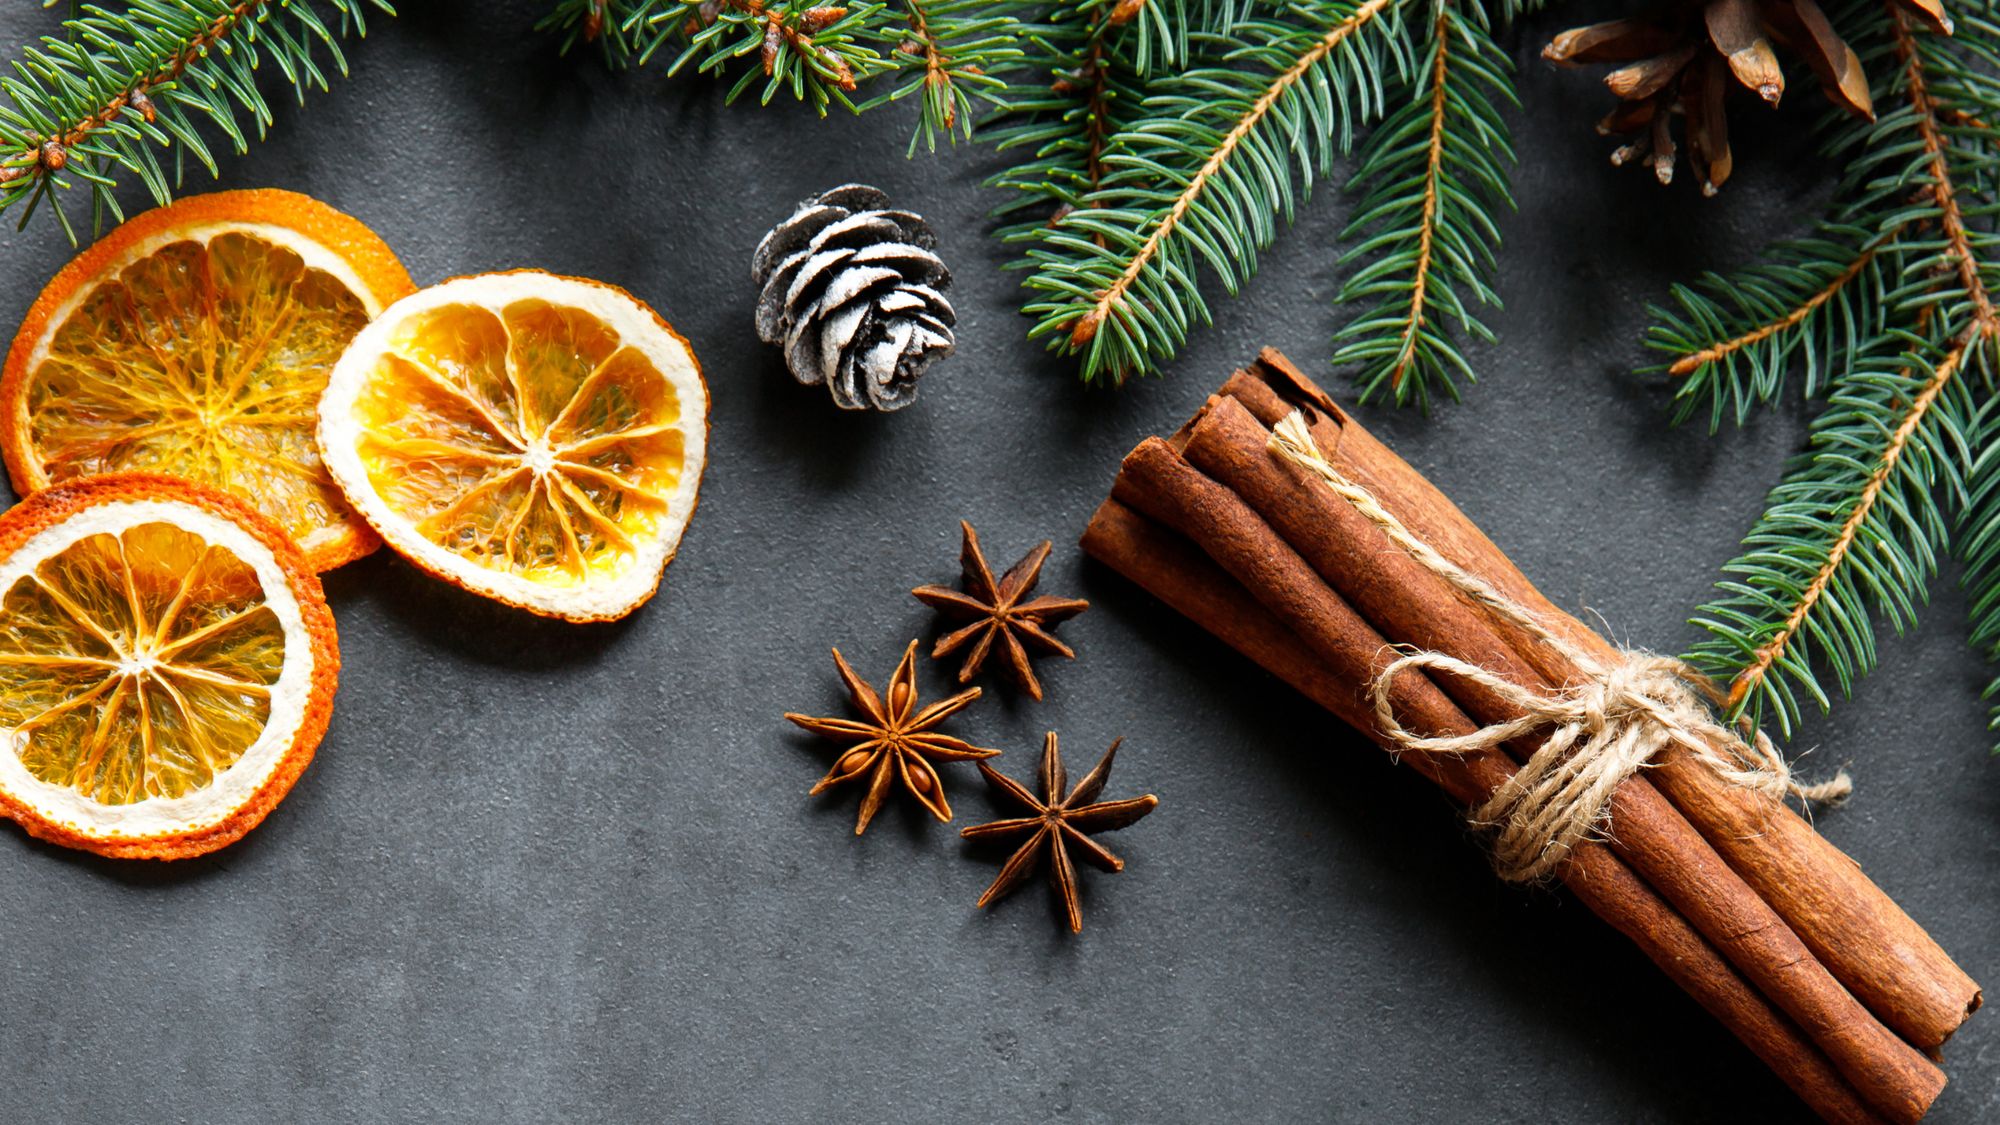 Holiday Simmer Pot Recipe blog post. Scene of holiday spices - orange citrus slices, star anise, cinnamon sticks, pine branches, and pinecones.